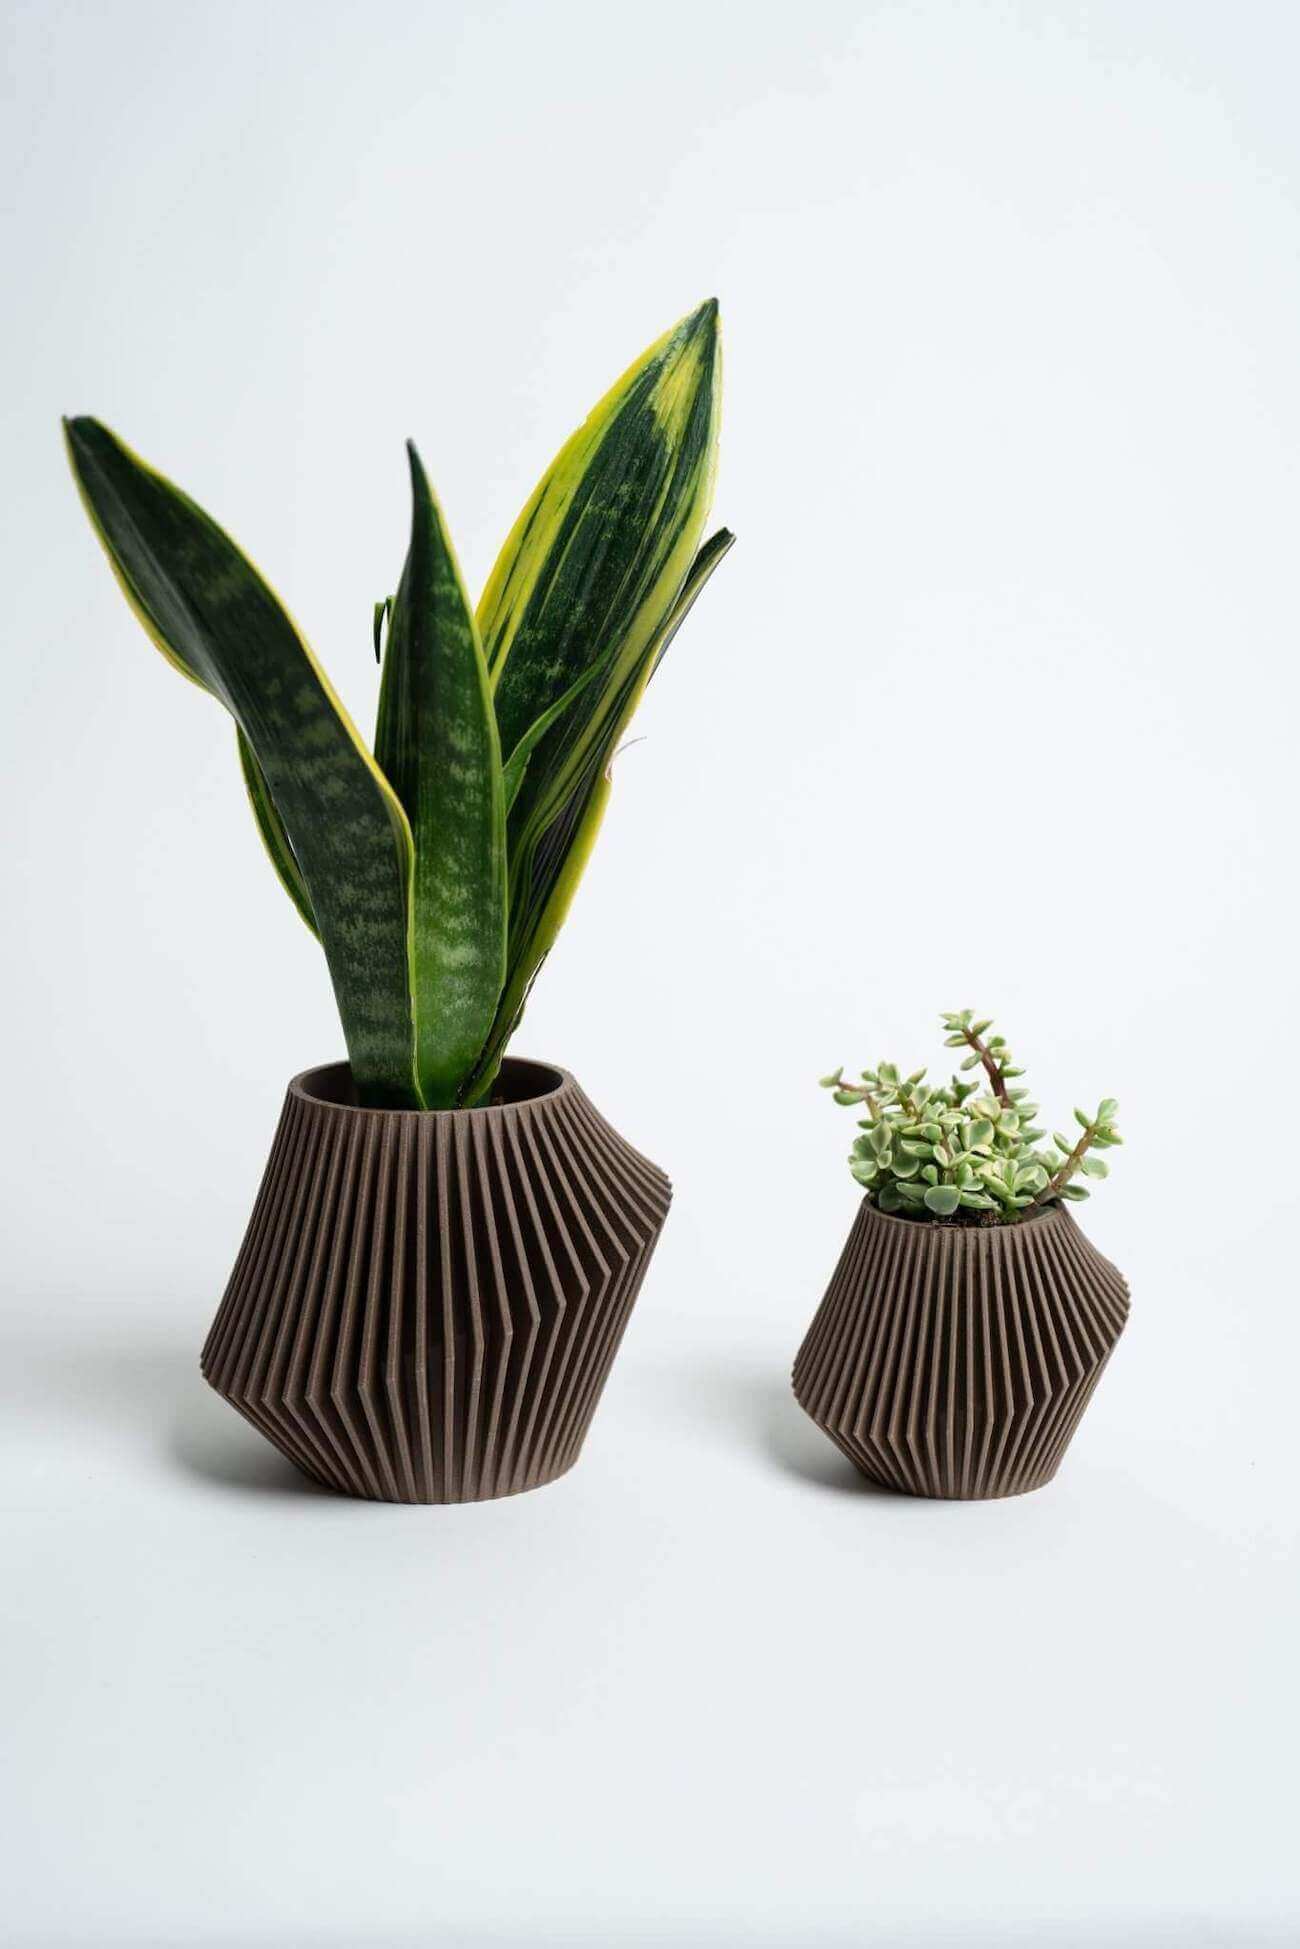 Two pots for planting succulents by Woodland Pulse. These are two brown decor planters from the W. Planter collection.